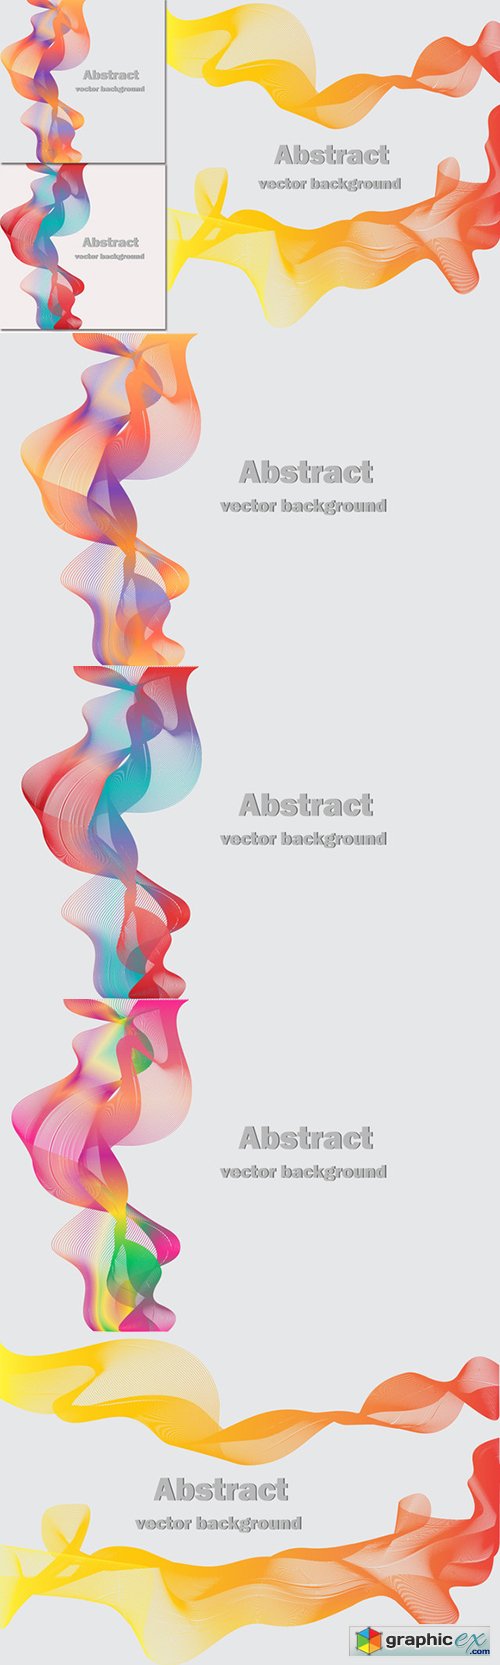  Abstract Vector Wave Background